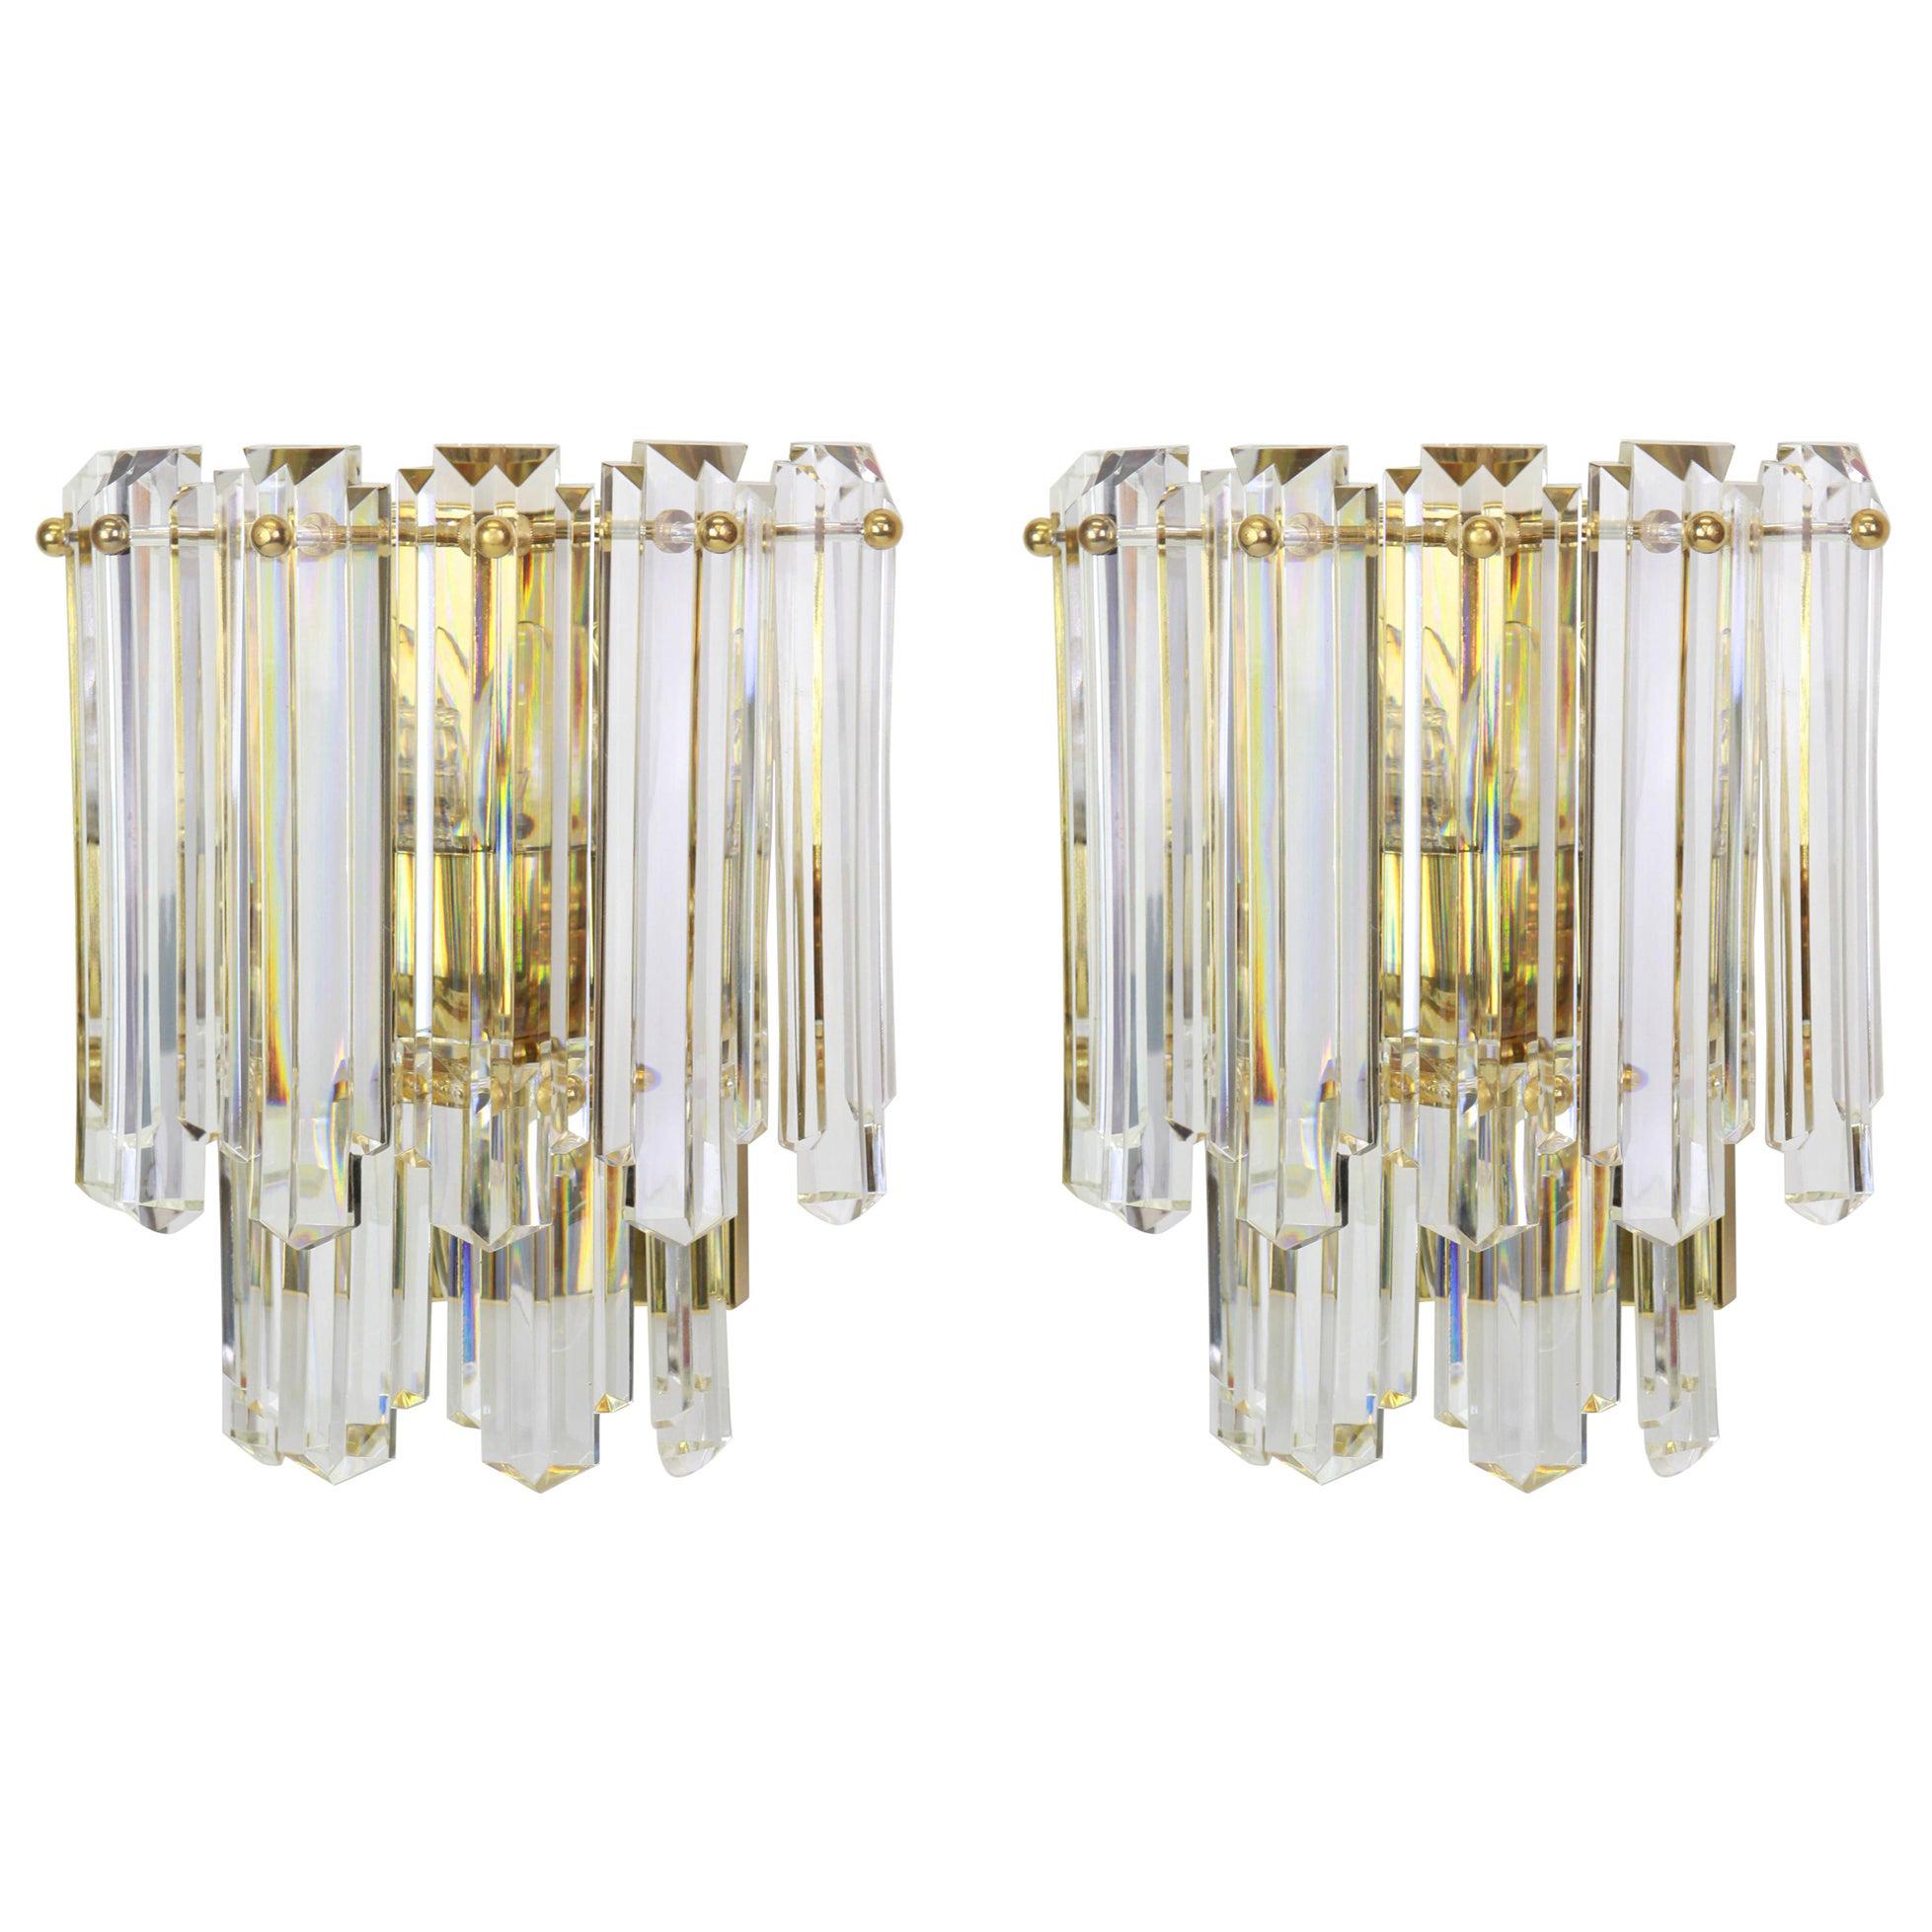 Pair of Large Kalmar Crystal Glass Sconces Wall Lights, Austria, 1970s For Sale